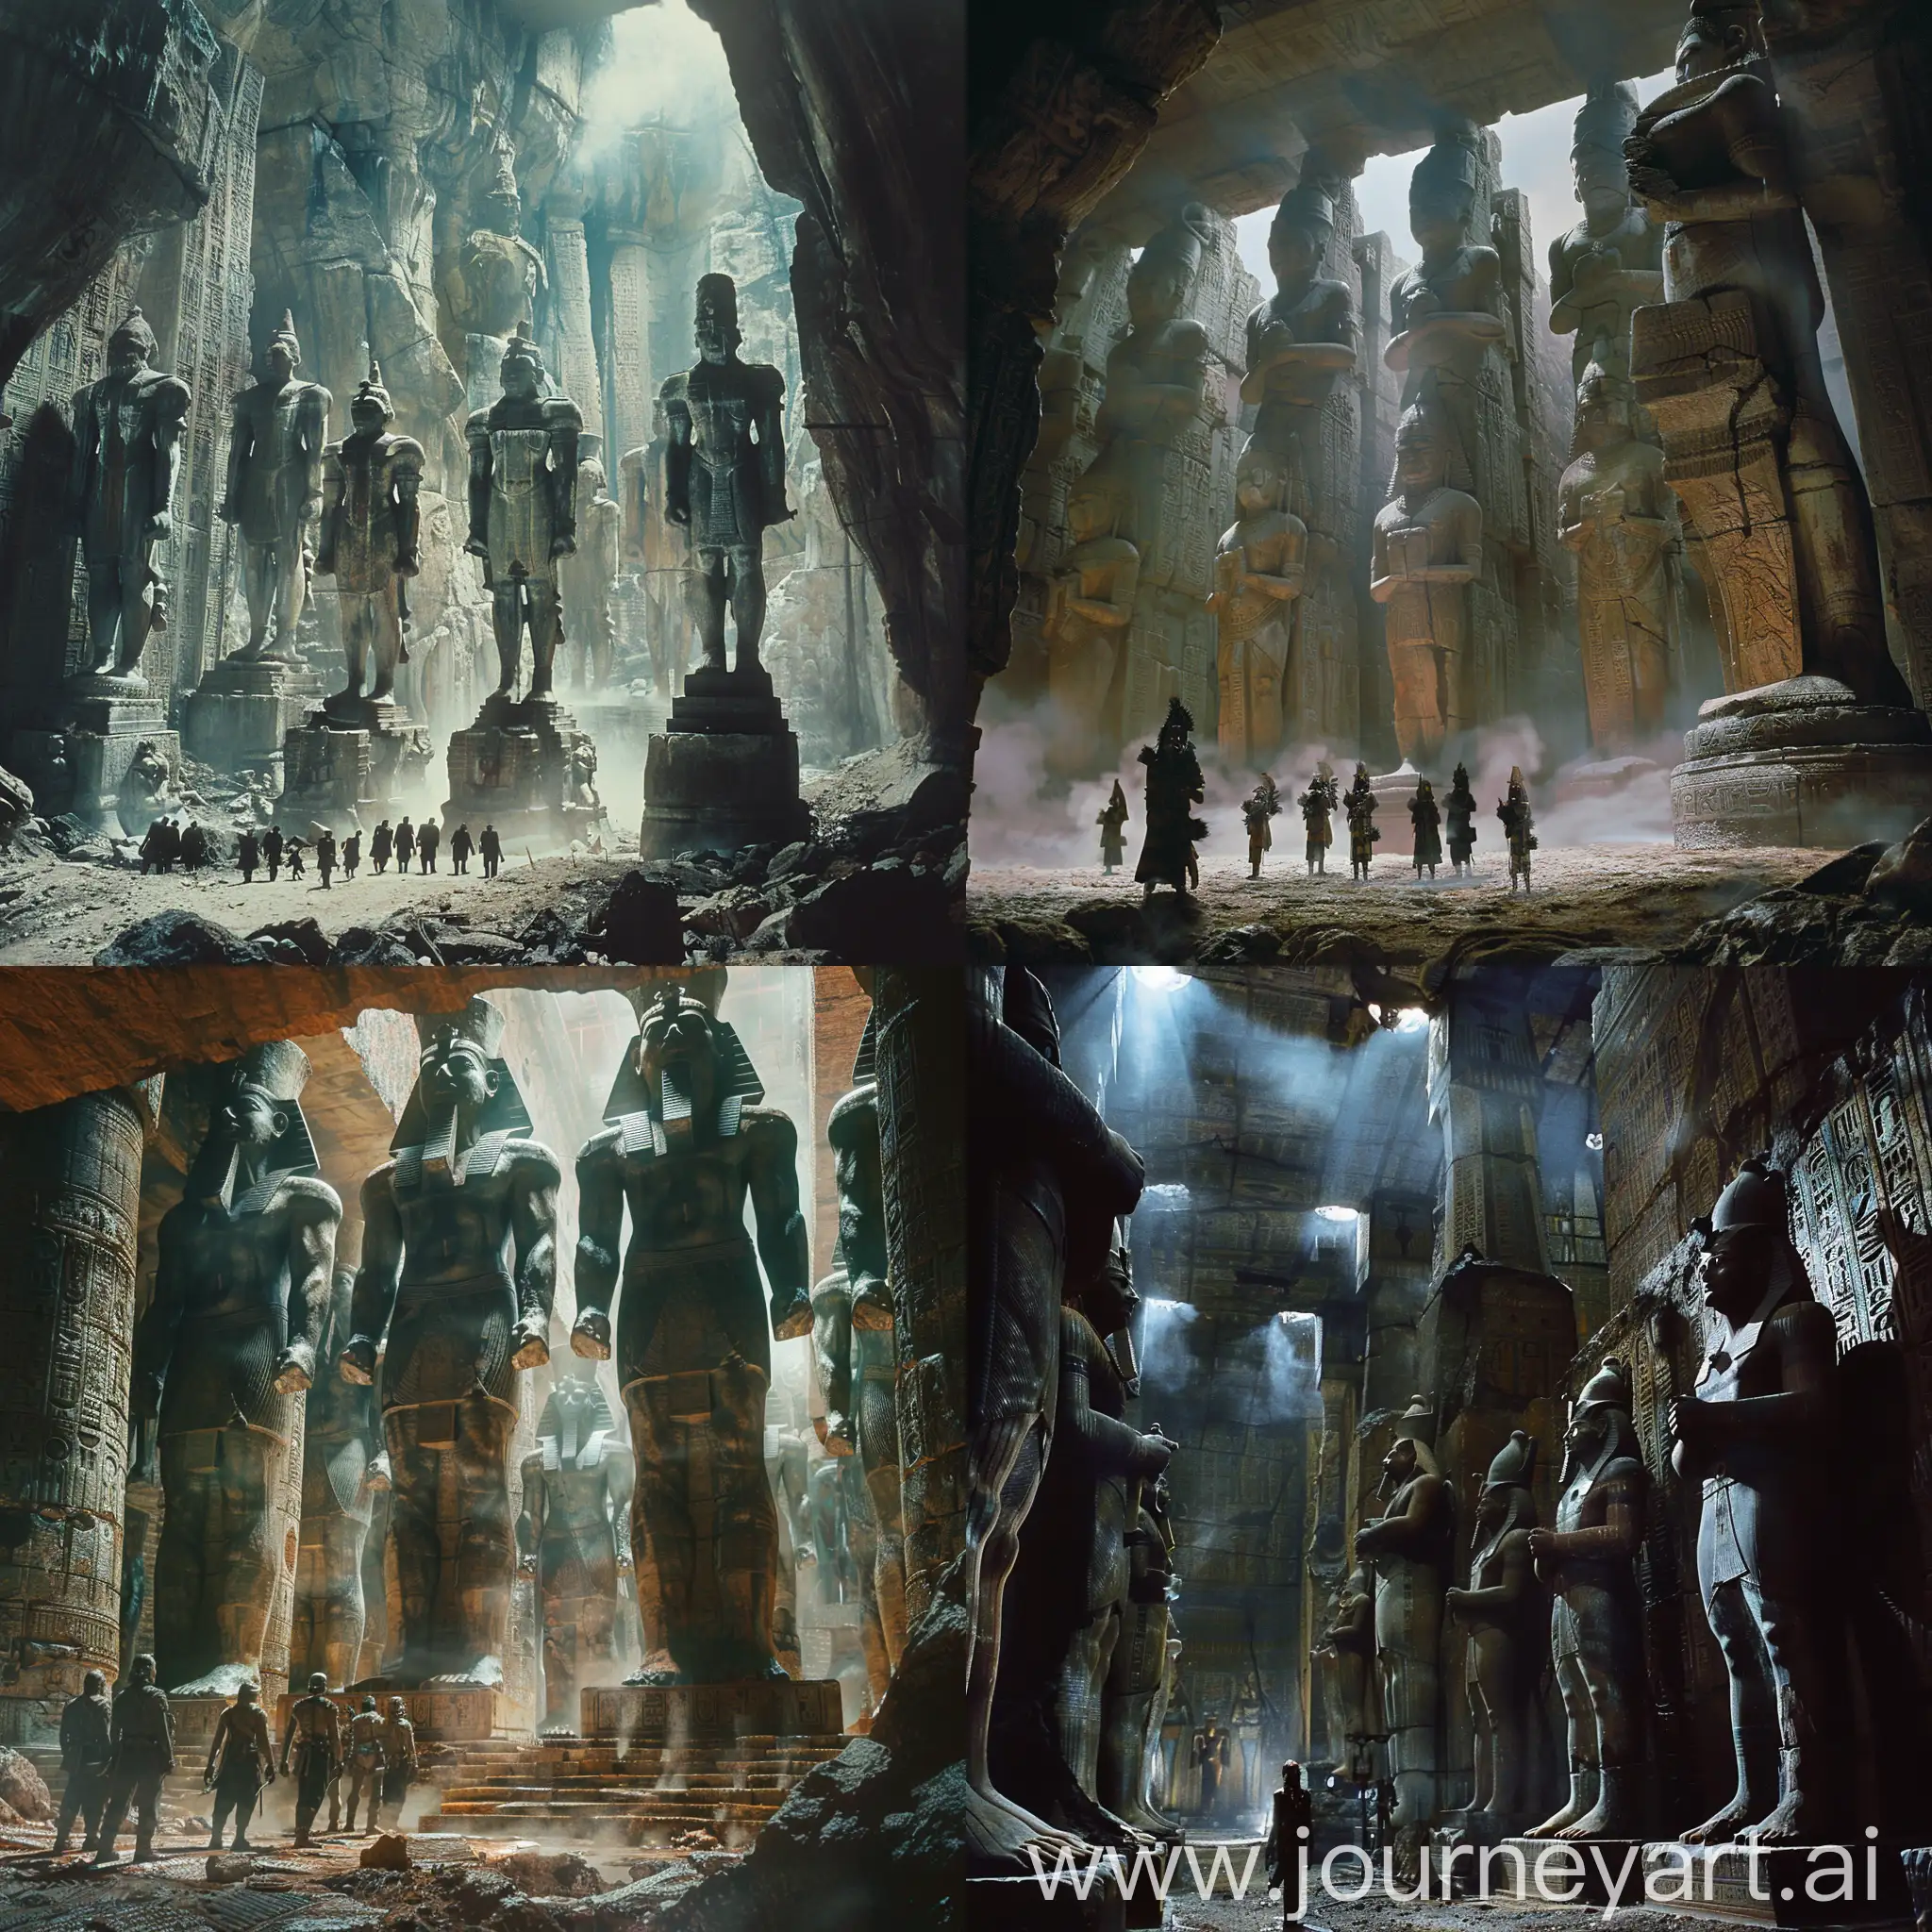 Epic-Cinematic-Scene-Ancient-Temple-with-Seven-Giant-God-Statues